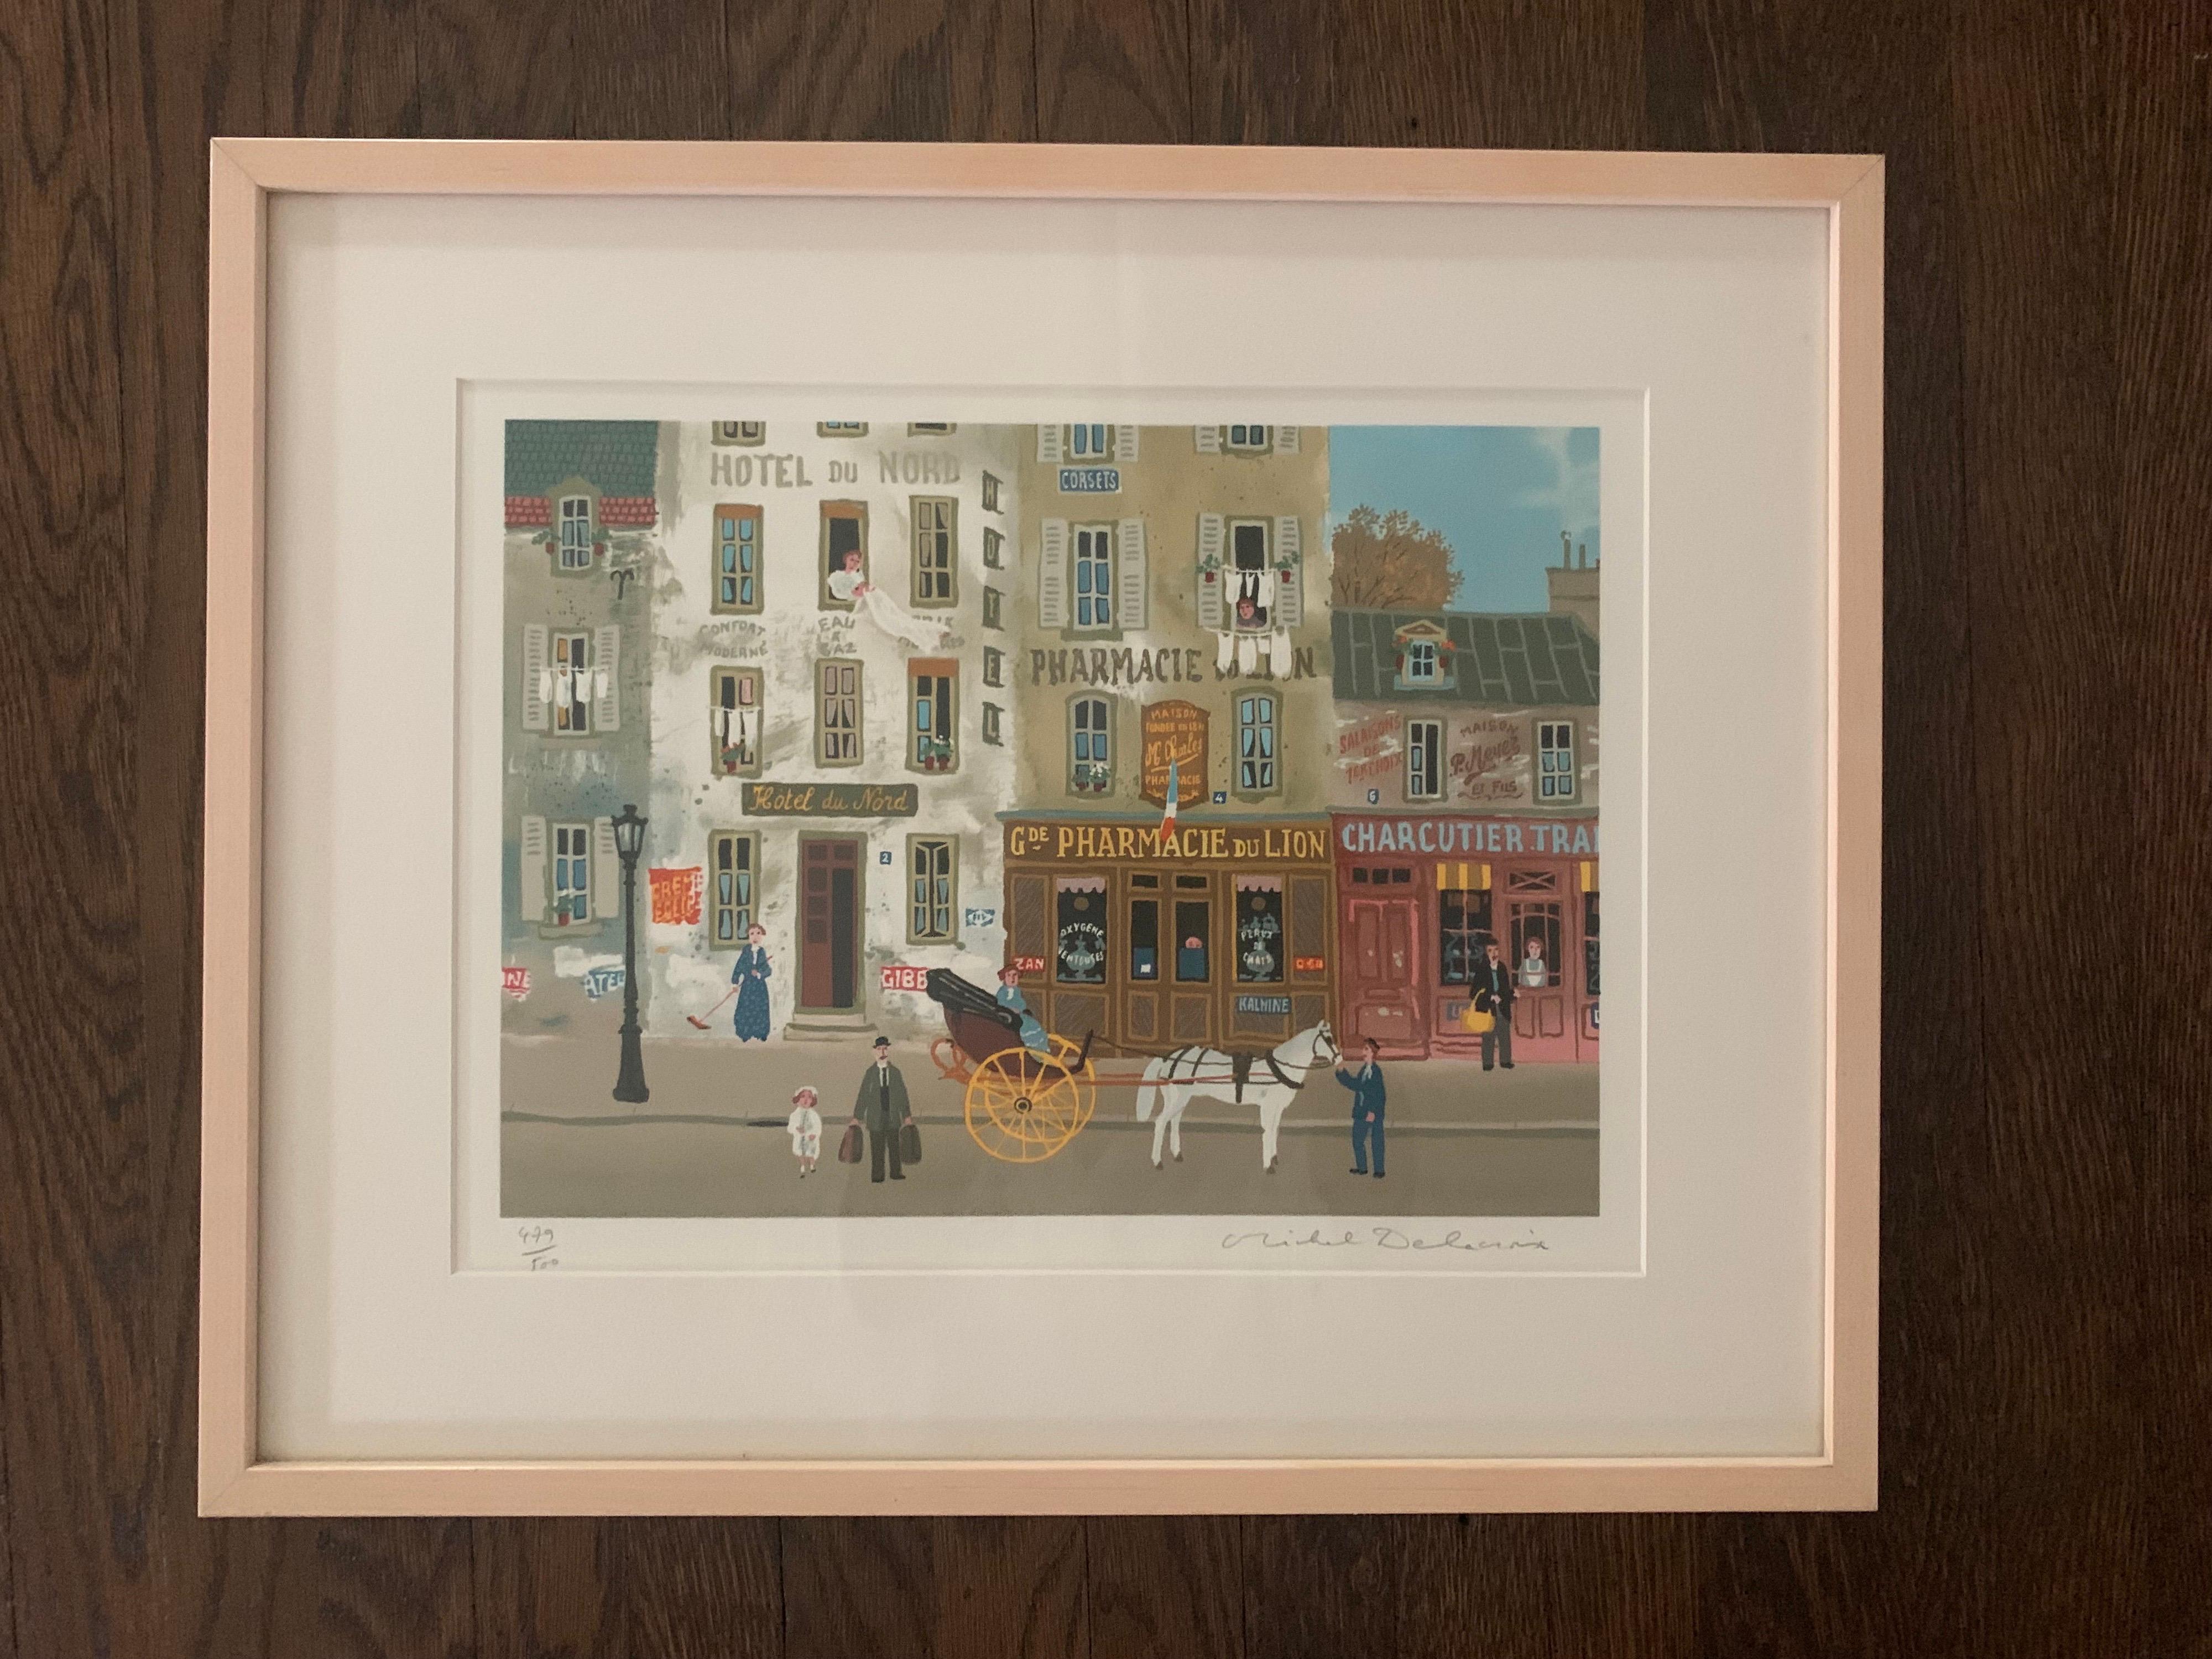 One of three limited edition signed in pencil lithographs by Michel Delacroix that we are selling exclusively on 1stDibs this week.

Michel Delacroix (1933- ) Internationally renowned French painter Michel Delacroix is an acclaimed master of the